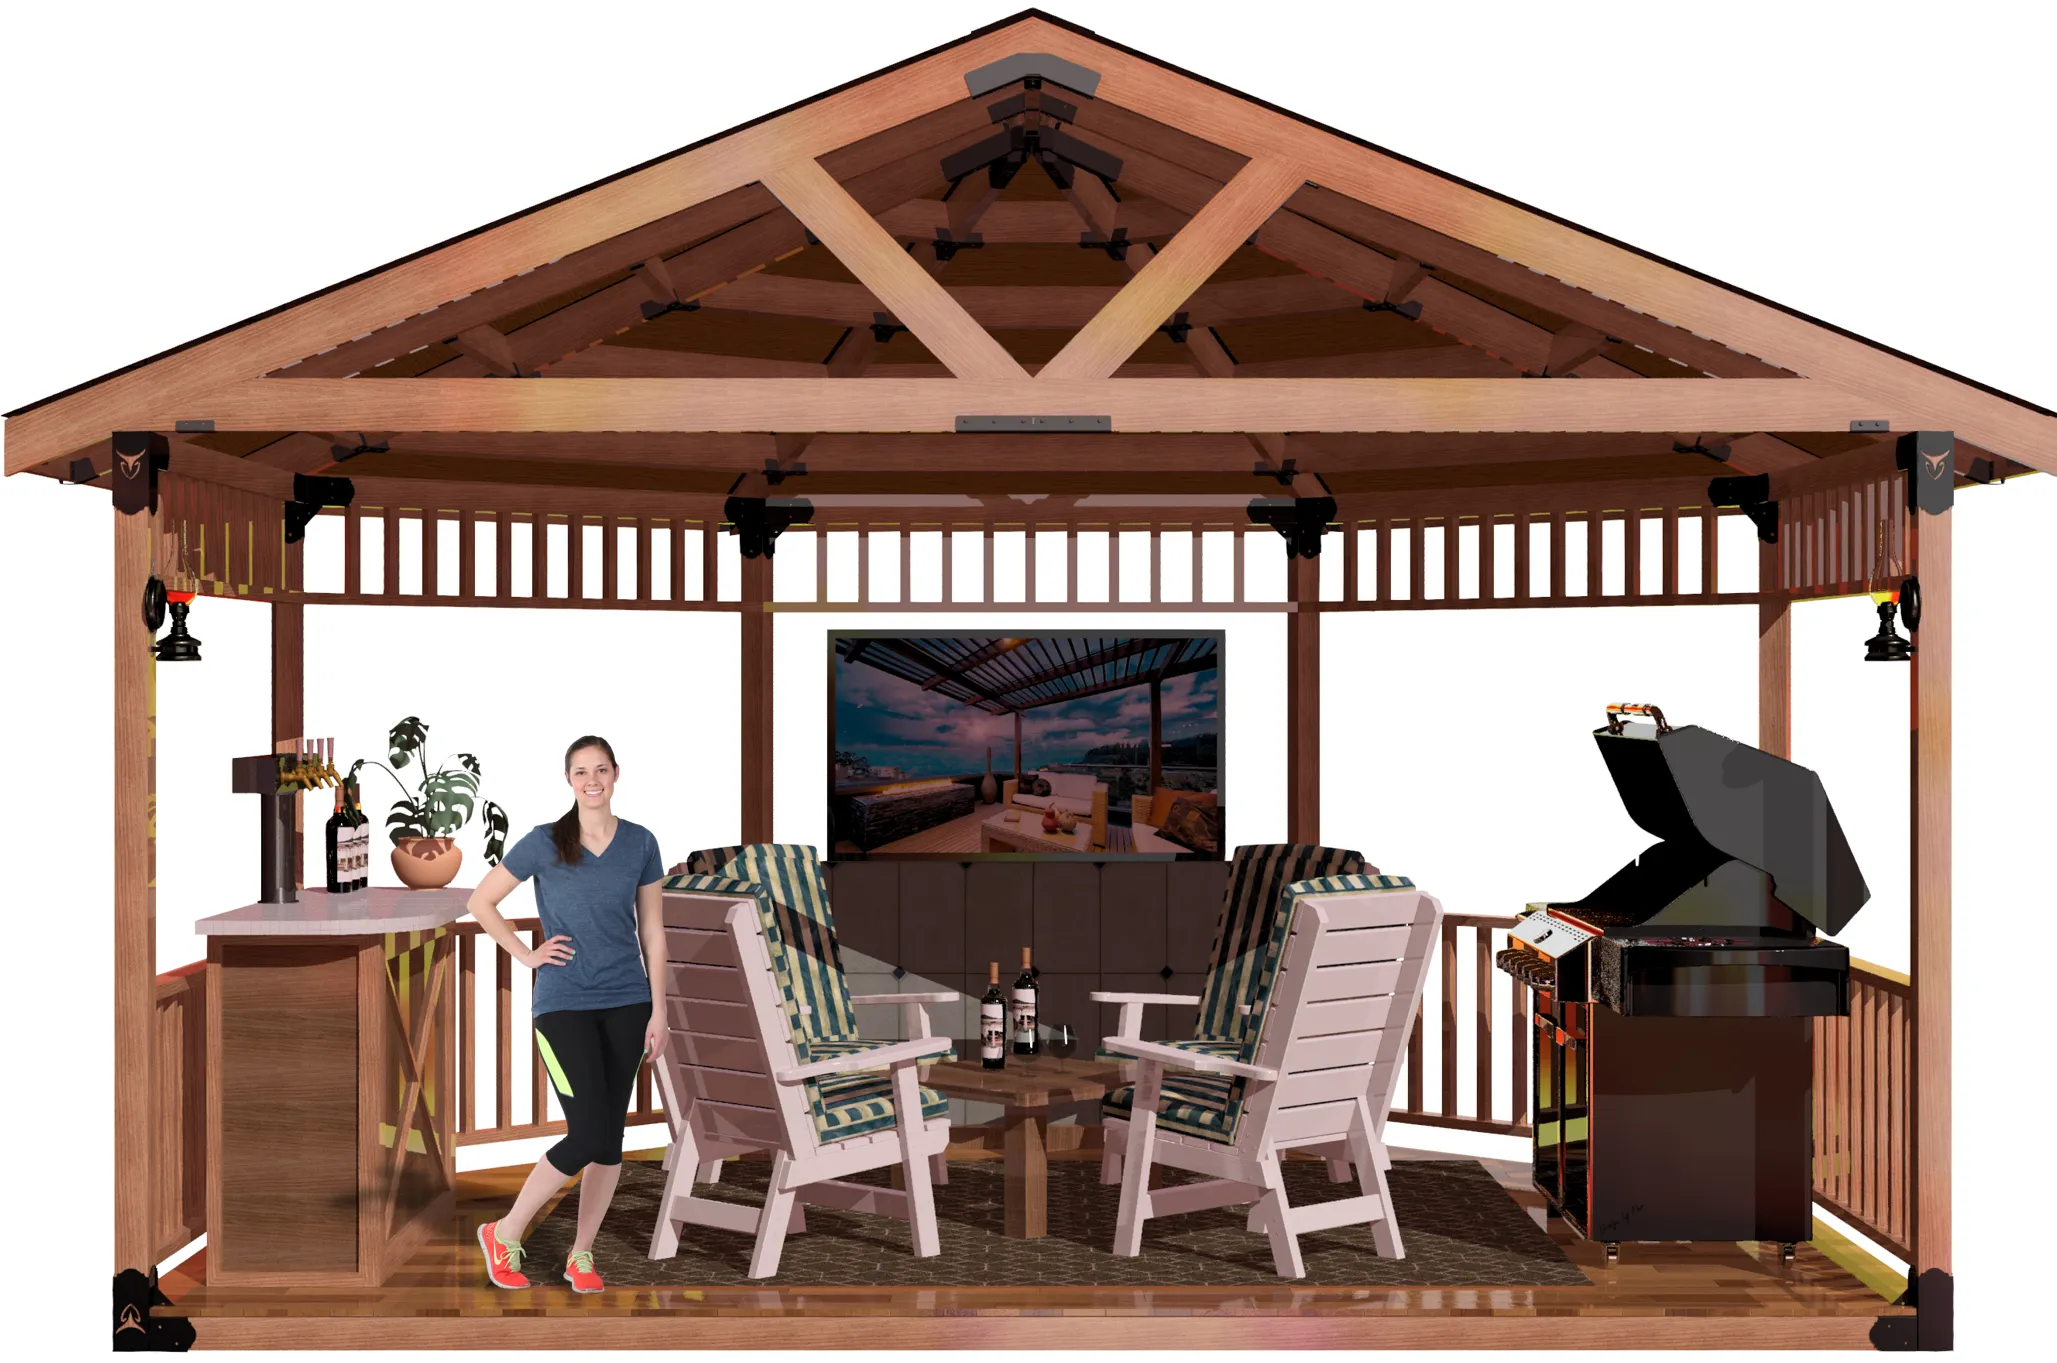 view of a DIY 4x4 solid roofed partial octagon gazebo. A bar with beer taps & wine bottles, barbecuer, LED TV, and casual furniture inside and a smiling girl standing inside it.